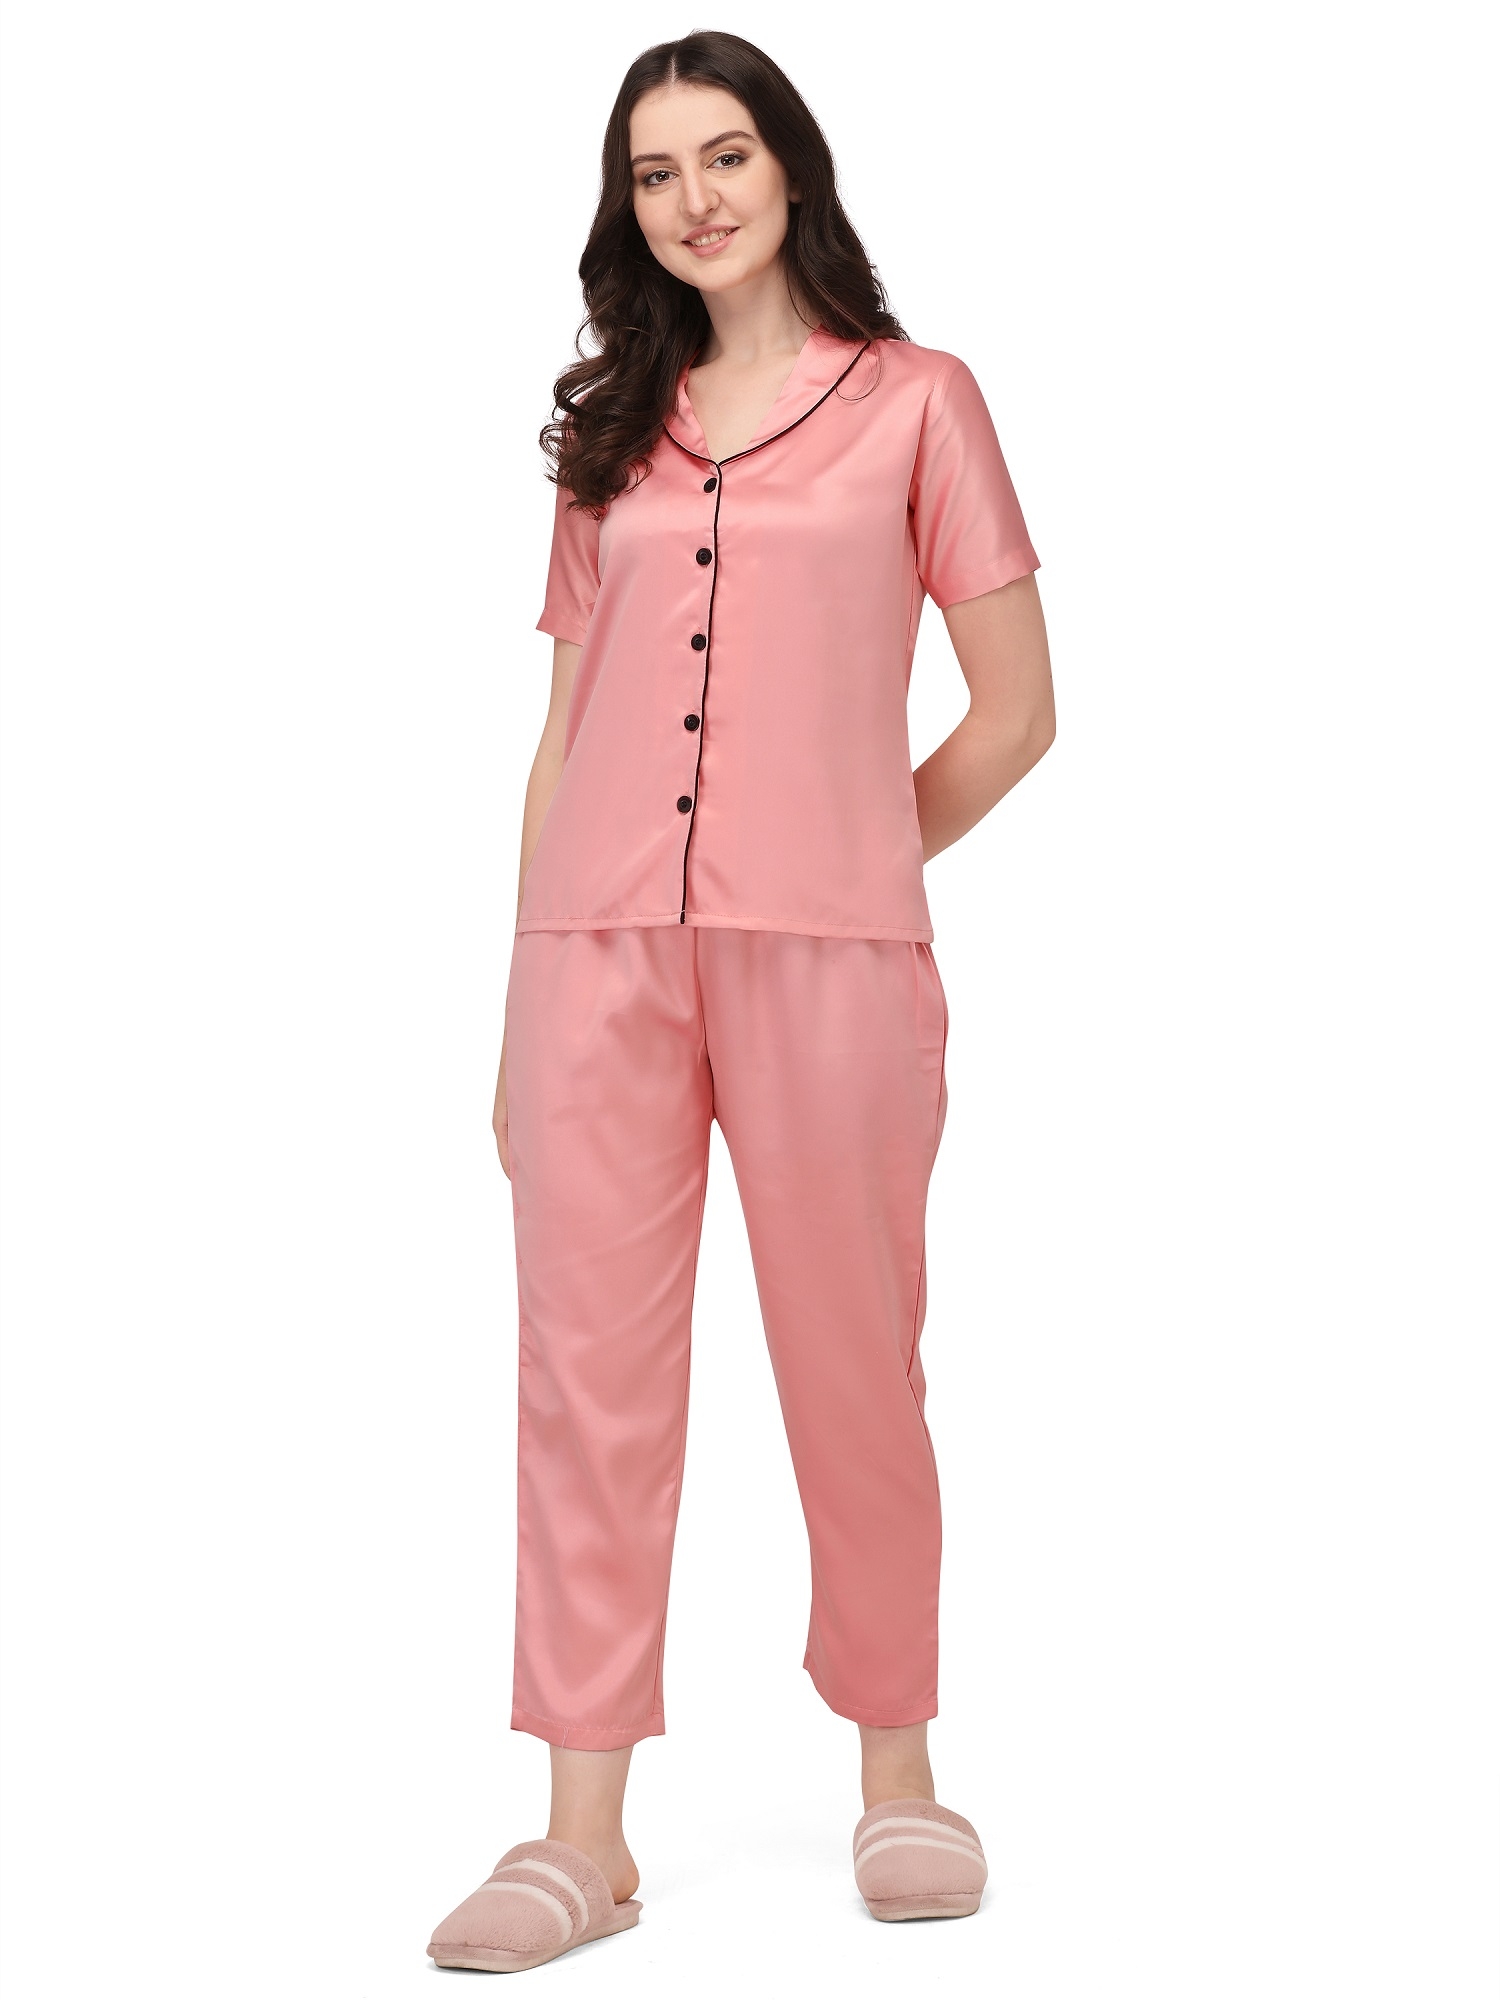 Smarty Pants | Smarty Pants women's silk satin shawl collar baby pink color night suit pair. 